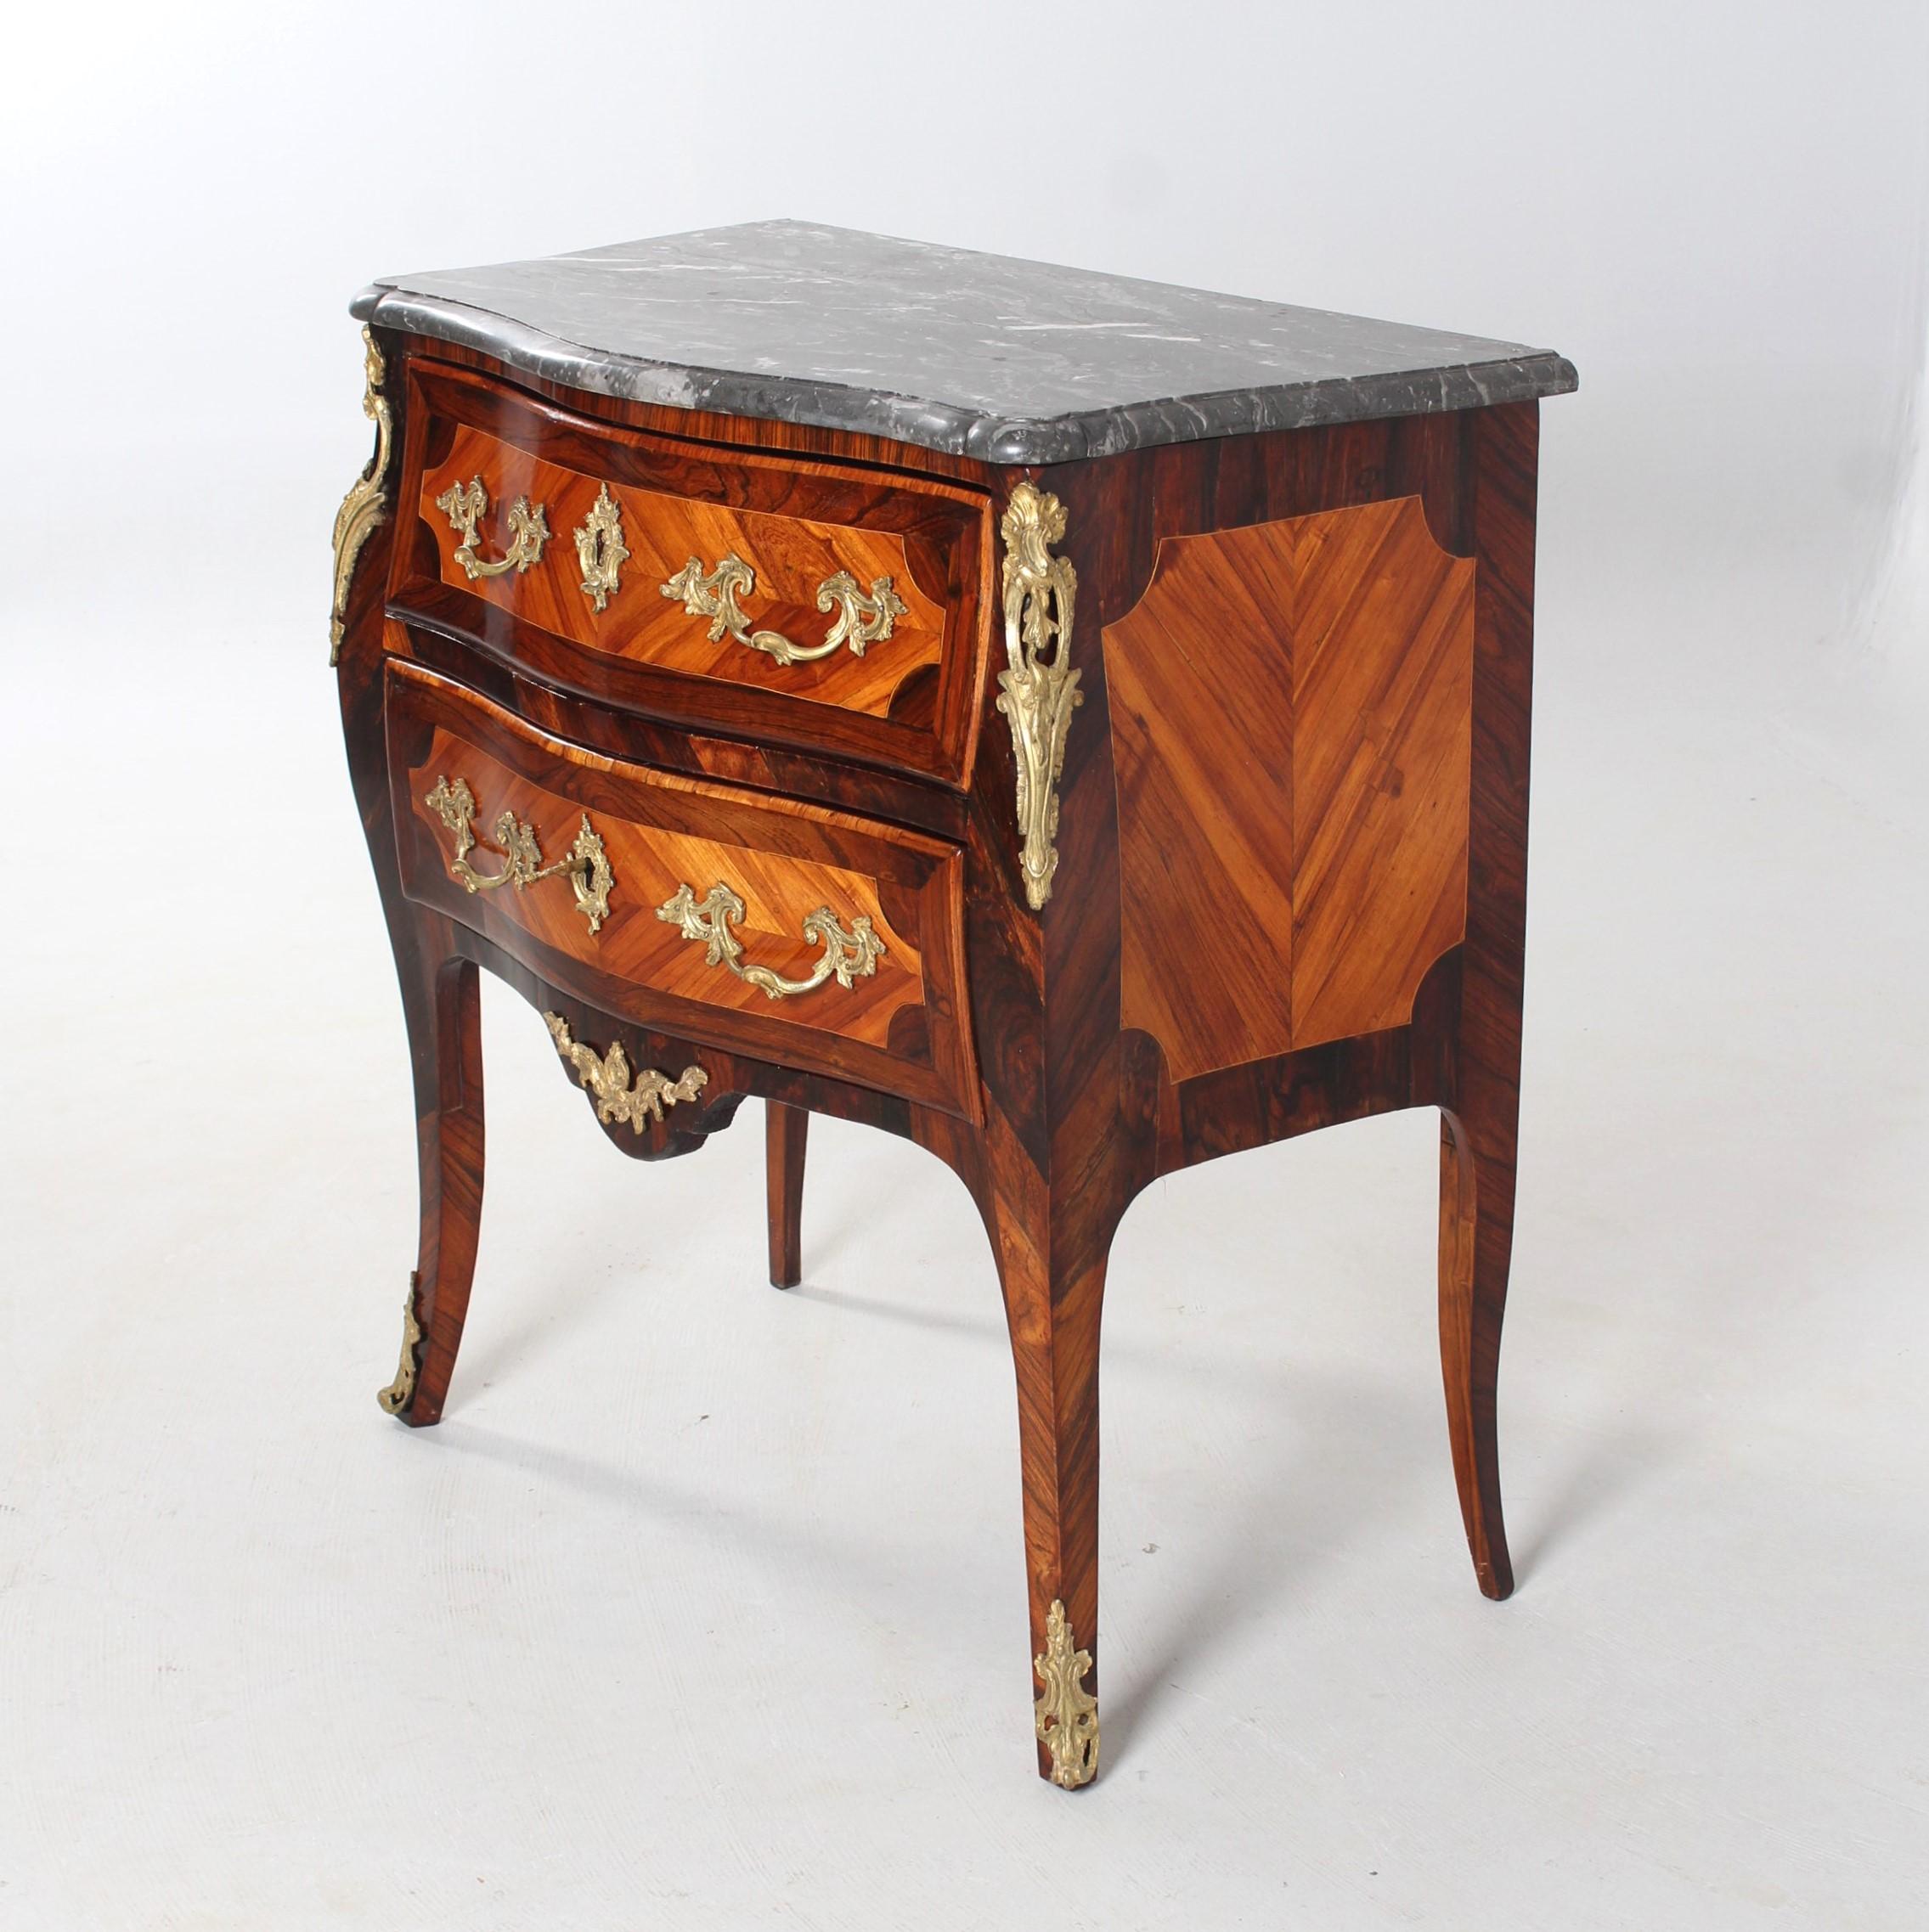 Small Louis XV Commode, so called Commode Sauteuse

France (Paris)
Rosewood
around 1760

Dimensions: with marble top H x W x D: 85 x 80 x 46 cm

Description:
Two-storey piece of furniture standing on slightly flared legs. The relatively long legs